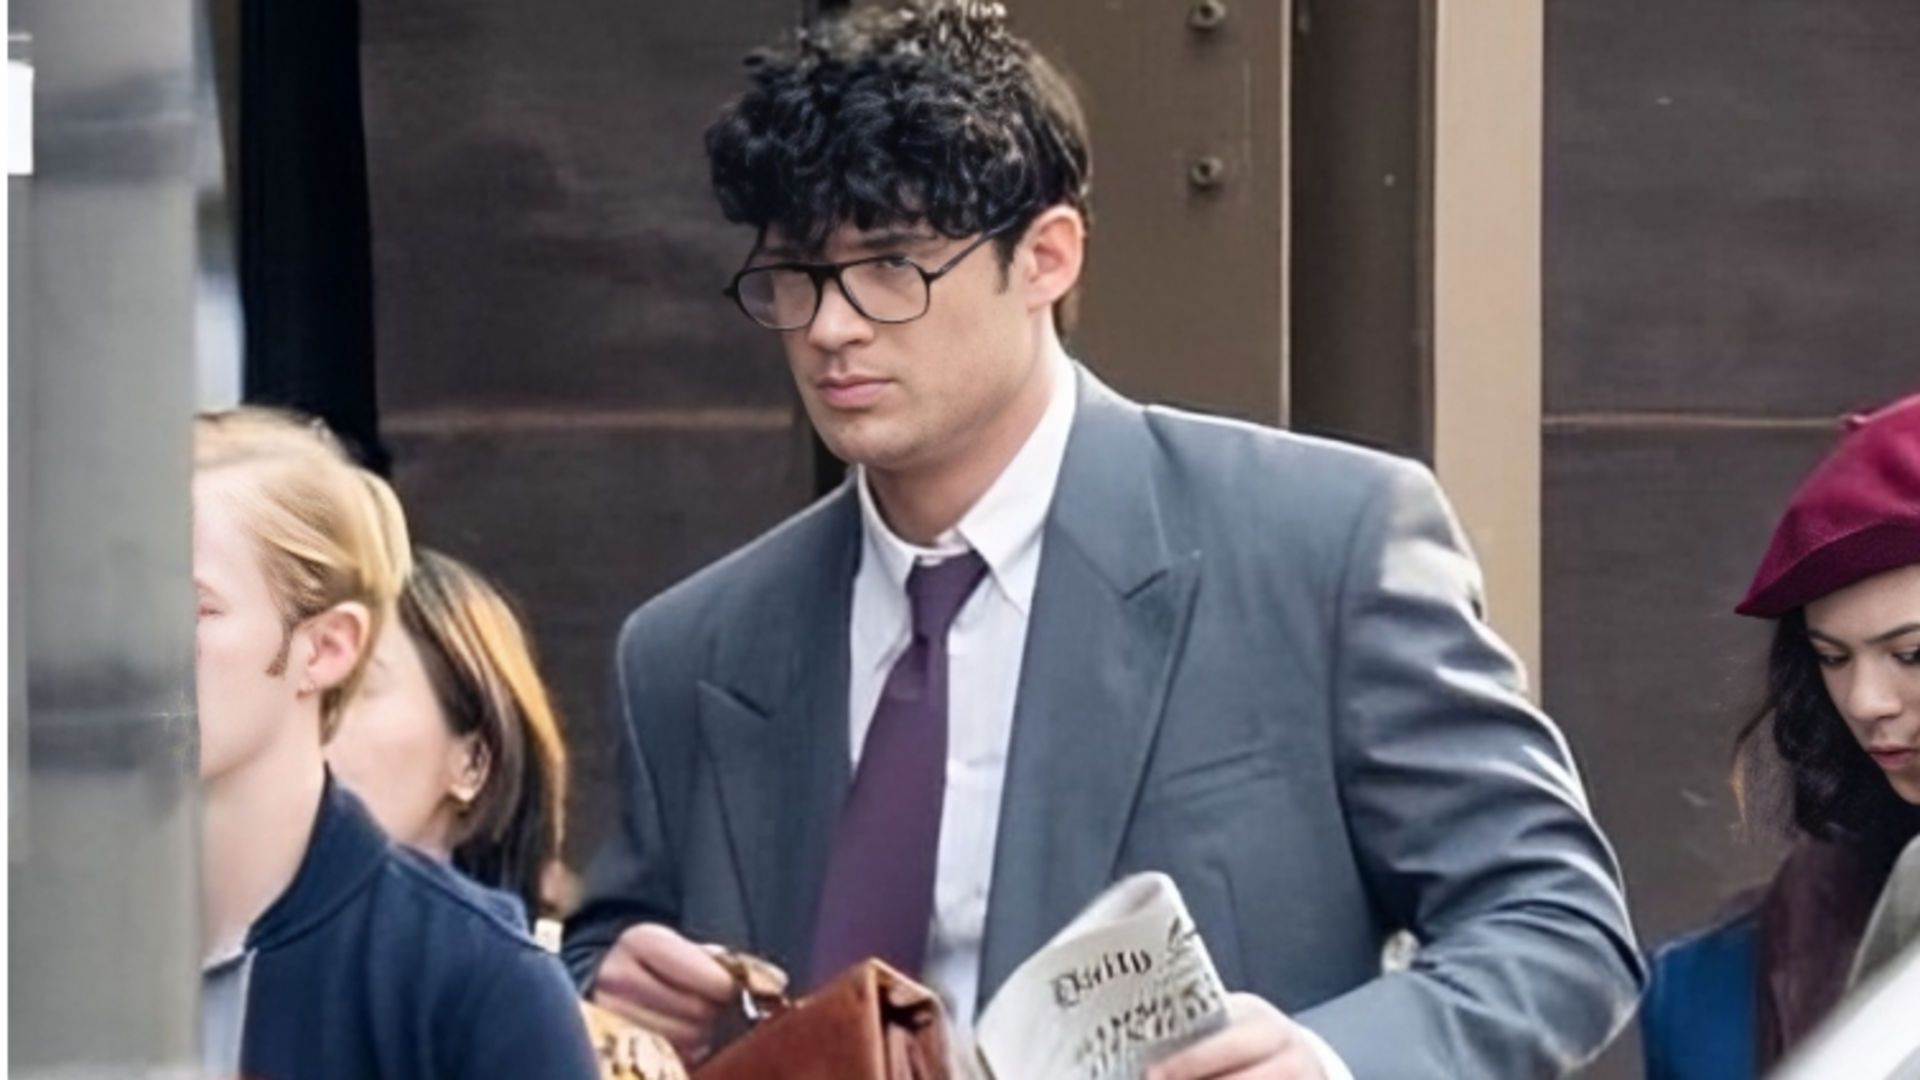 David Corenswet transforms into Clark Kent in on-set 'Superman' pictures